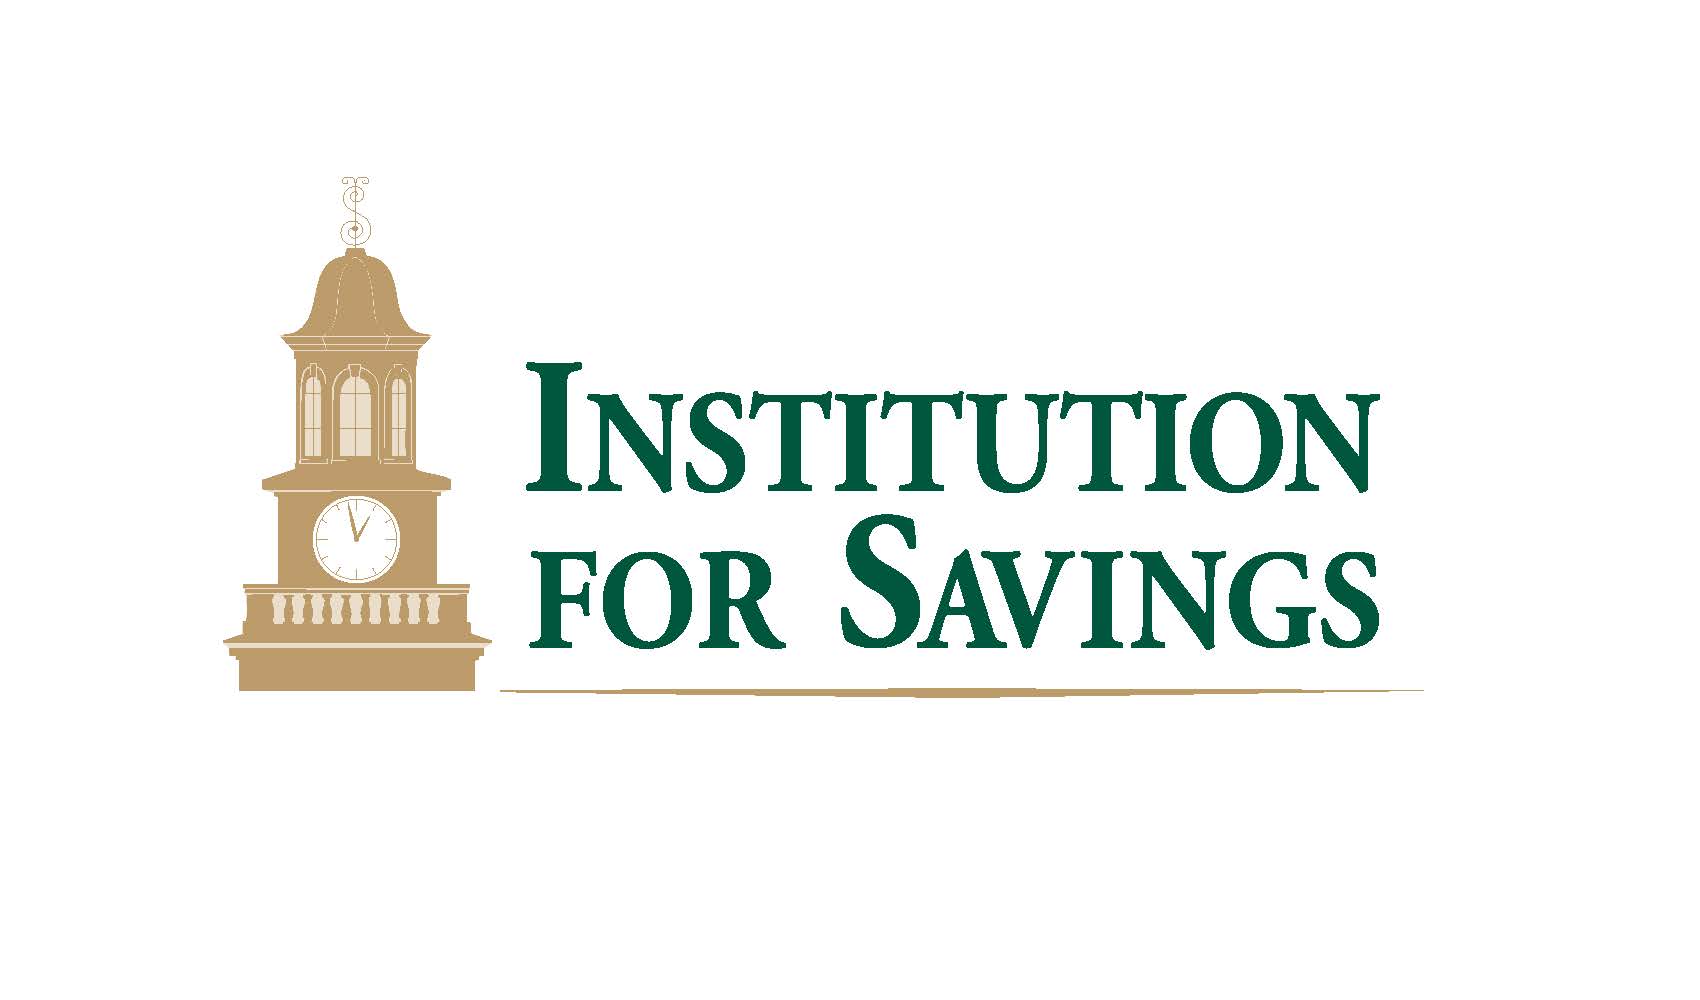 INSTITUTION FOR SAVINGS TO OPEN A NEW FULL-SERVICE OFFICE IN ...